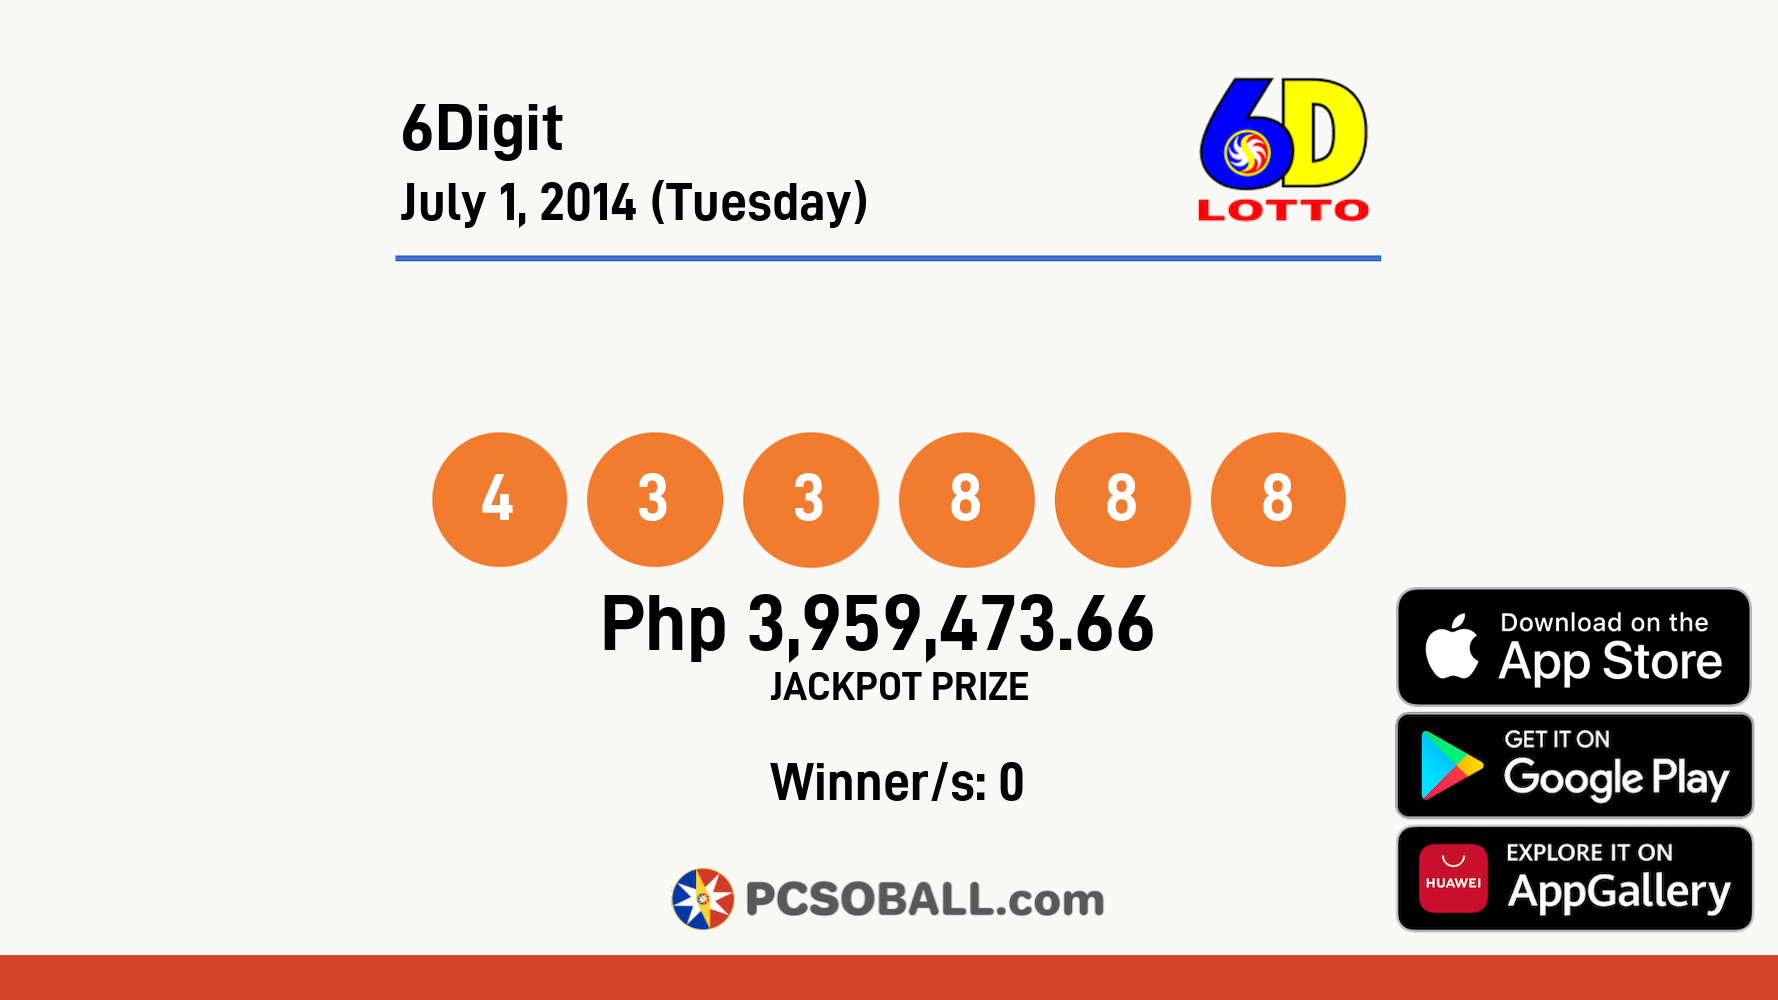 6Digit July 1, 2014 (Tuesday) Result